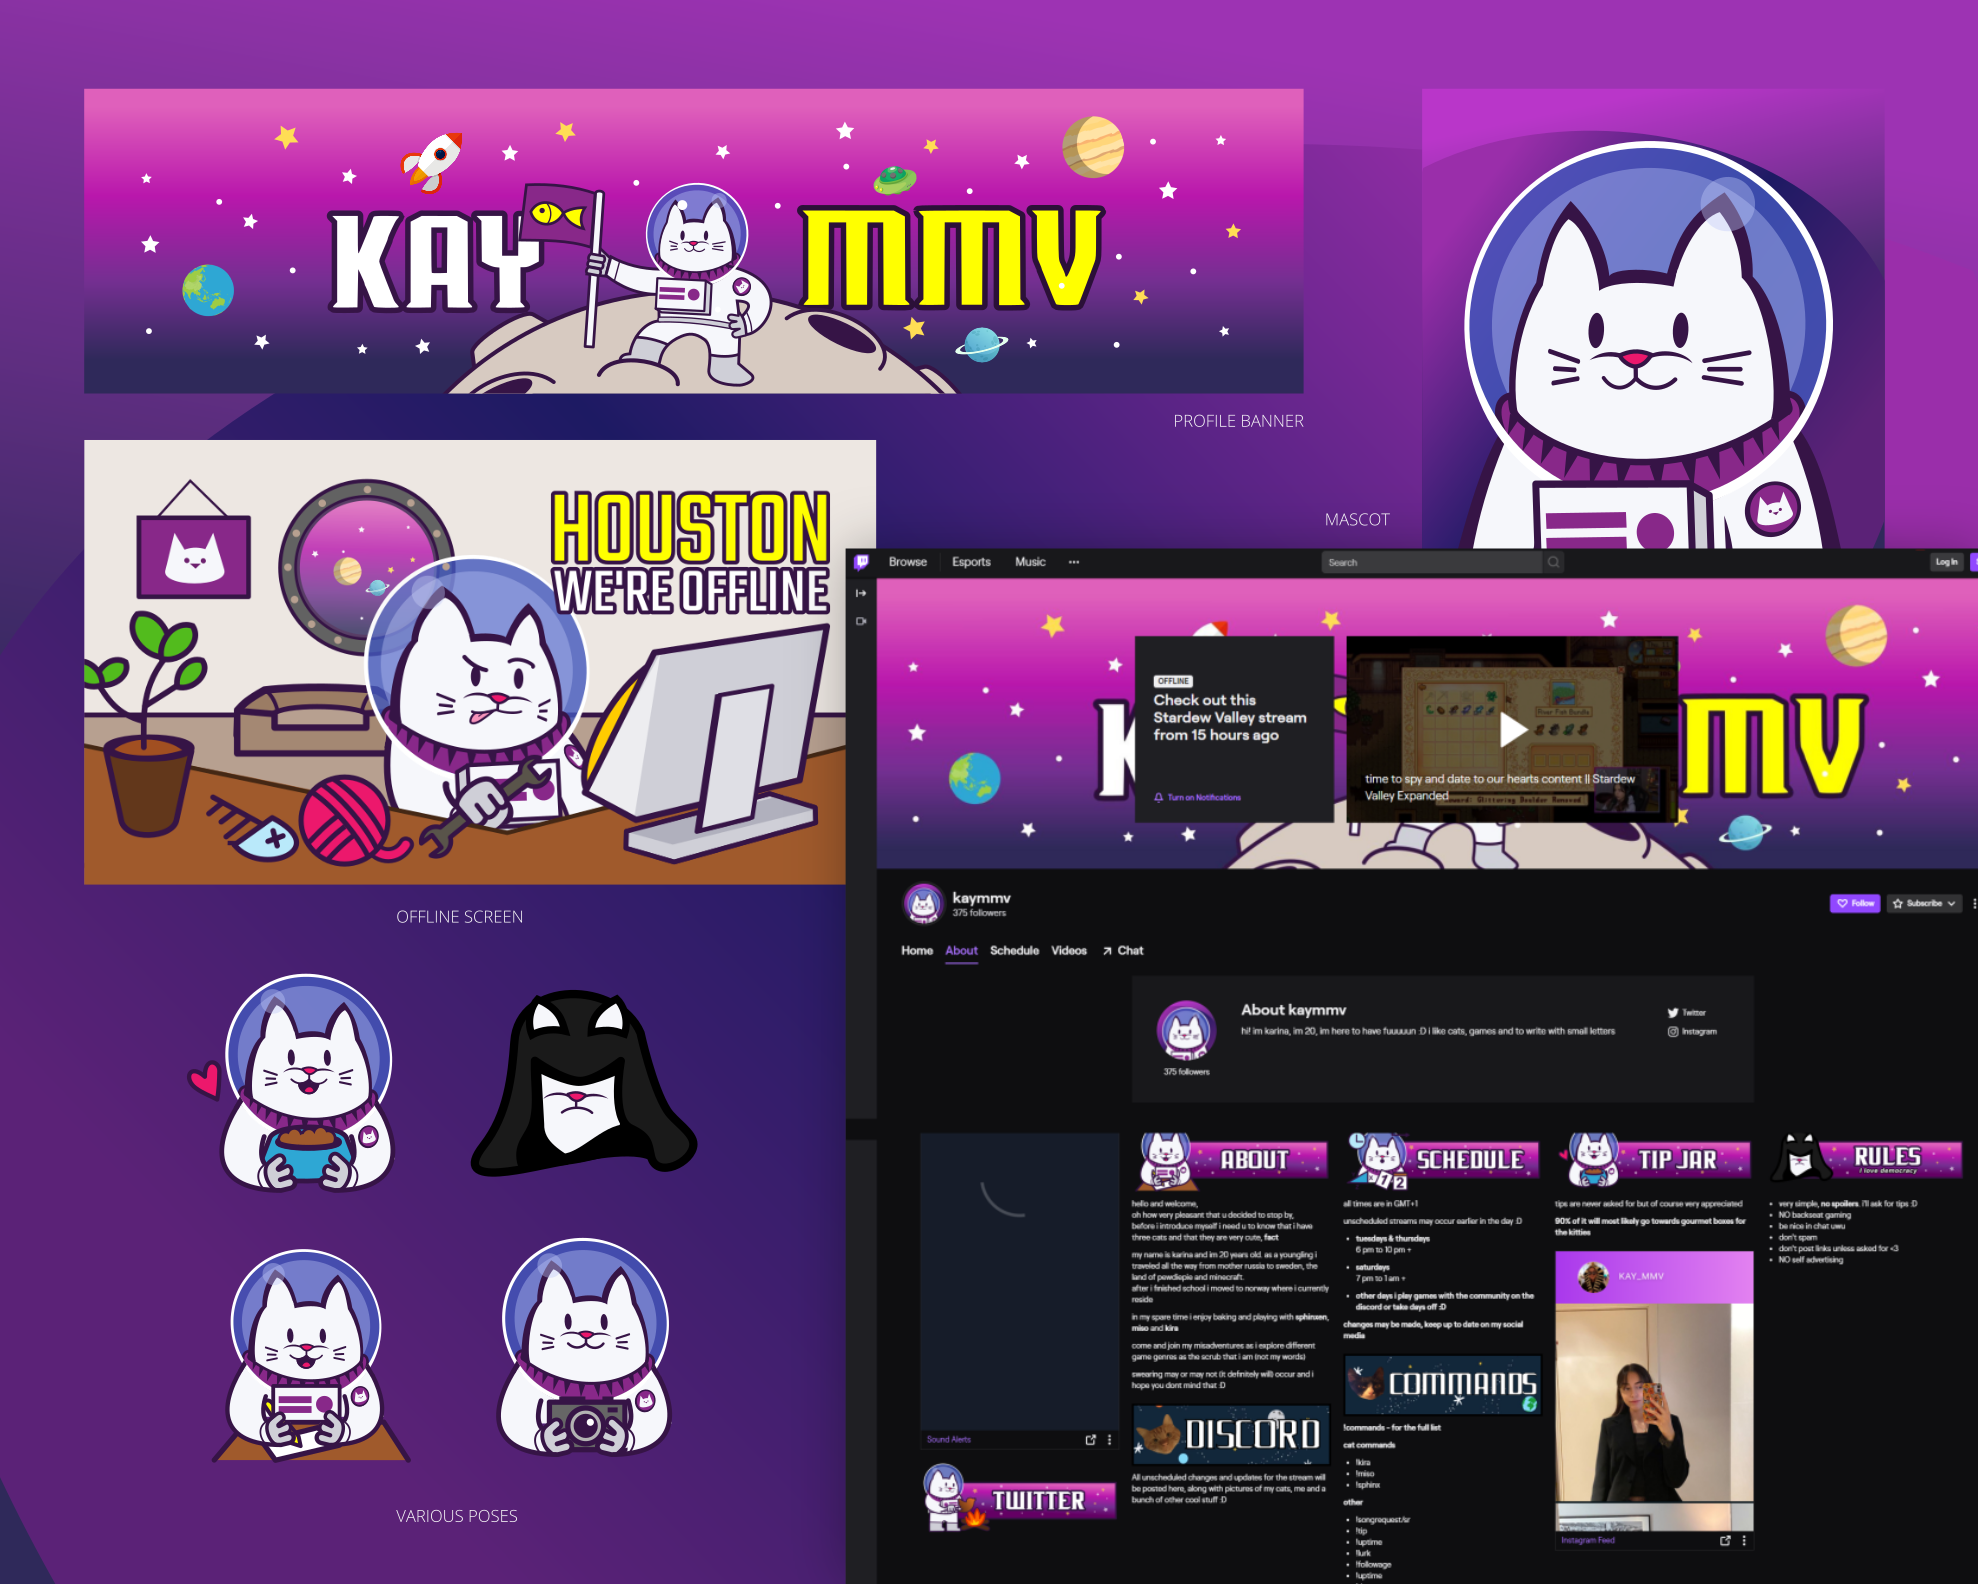 The Twitch graphics for kayMMV